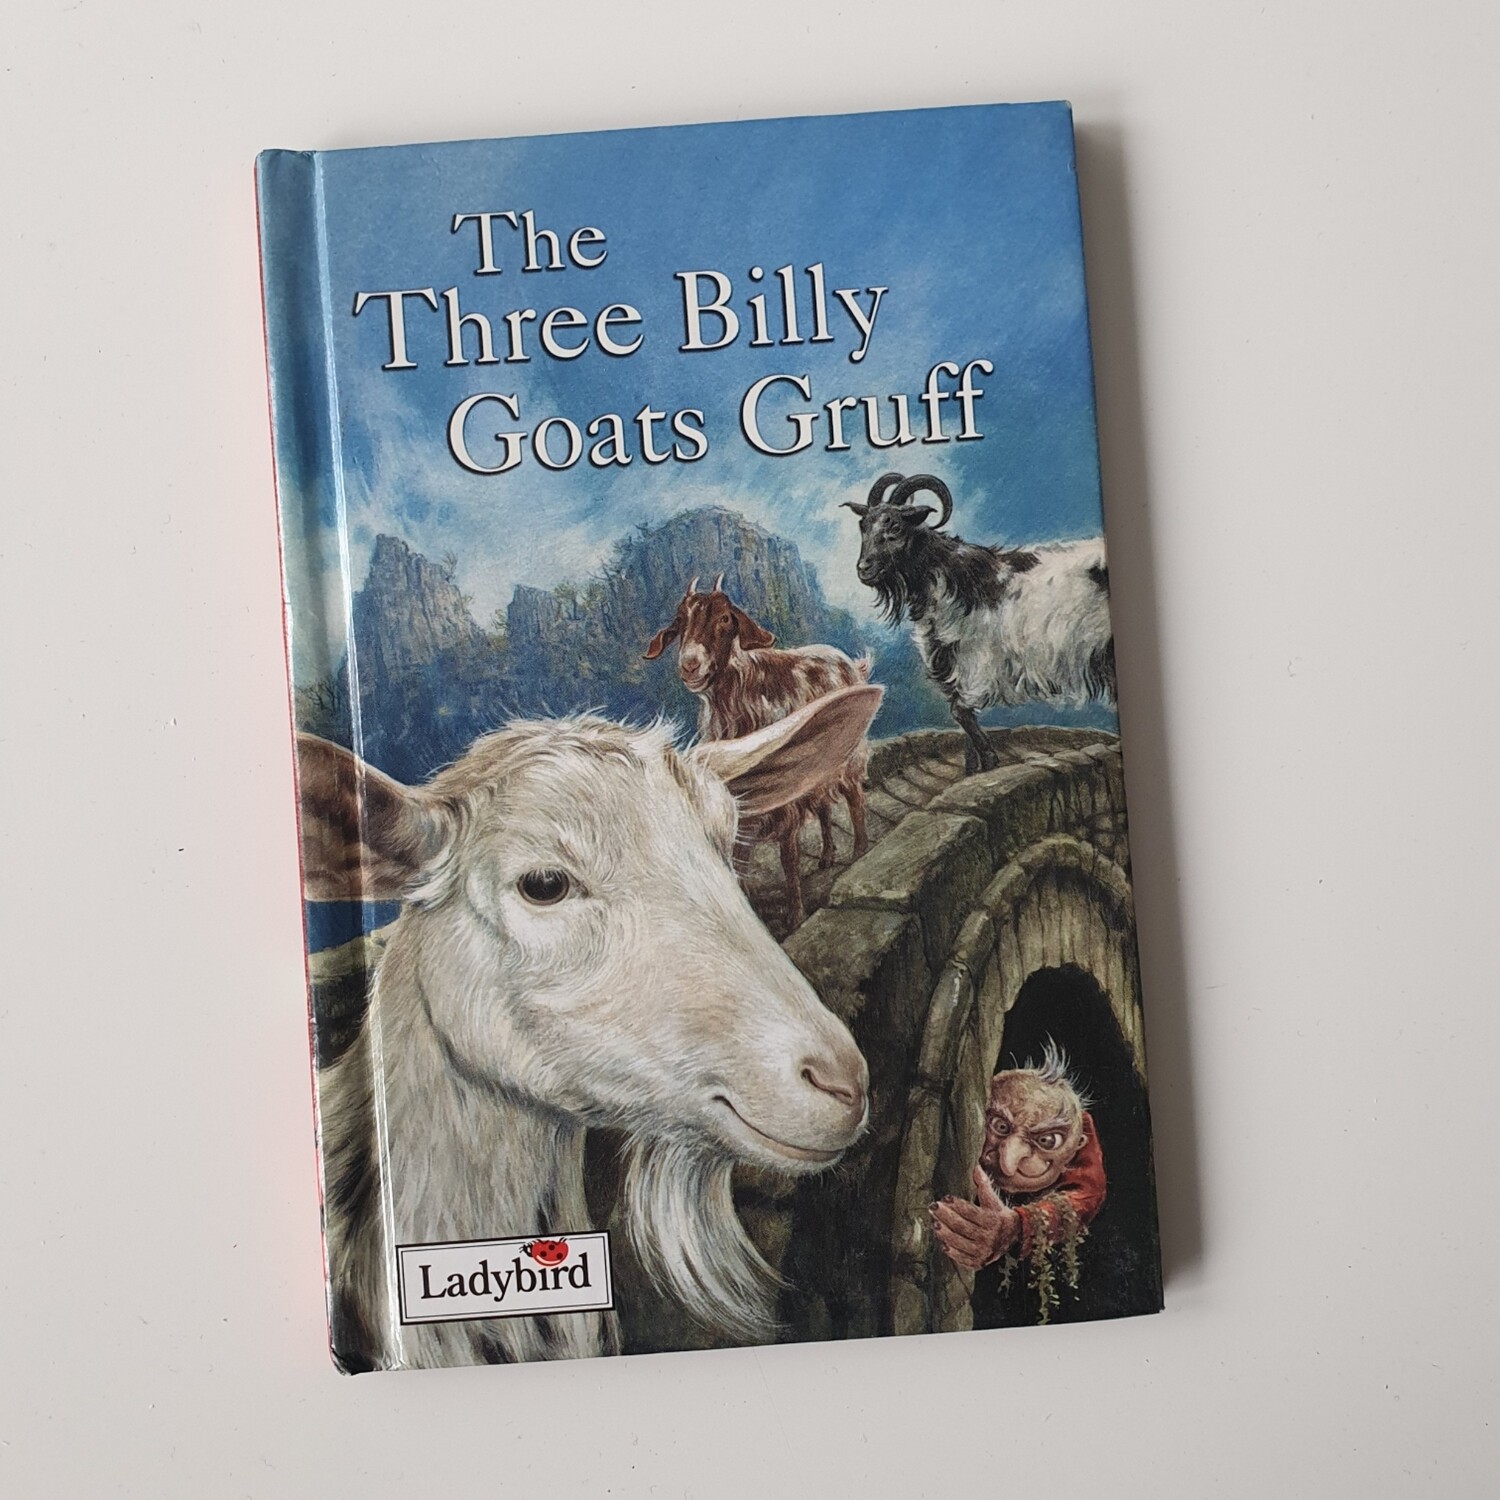 The Three Billy Goats Gruff Notebook - Ladybird Book - Well Loved Tales